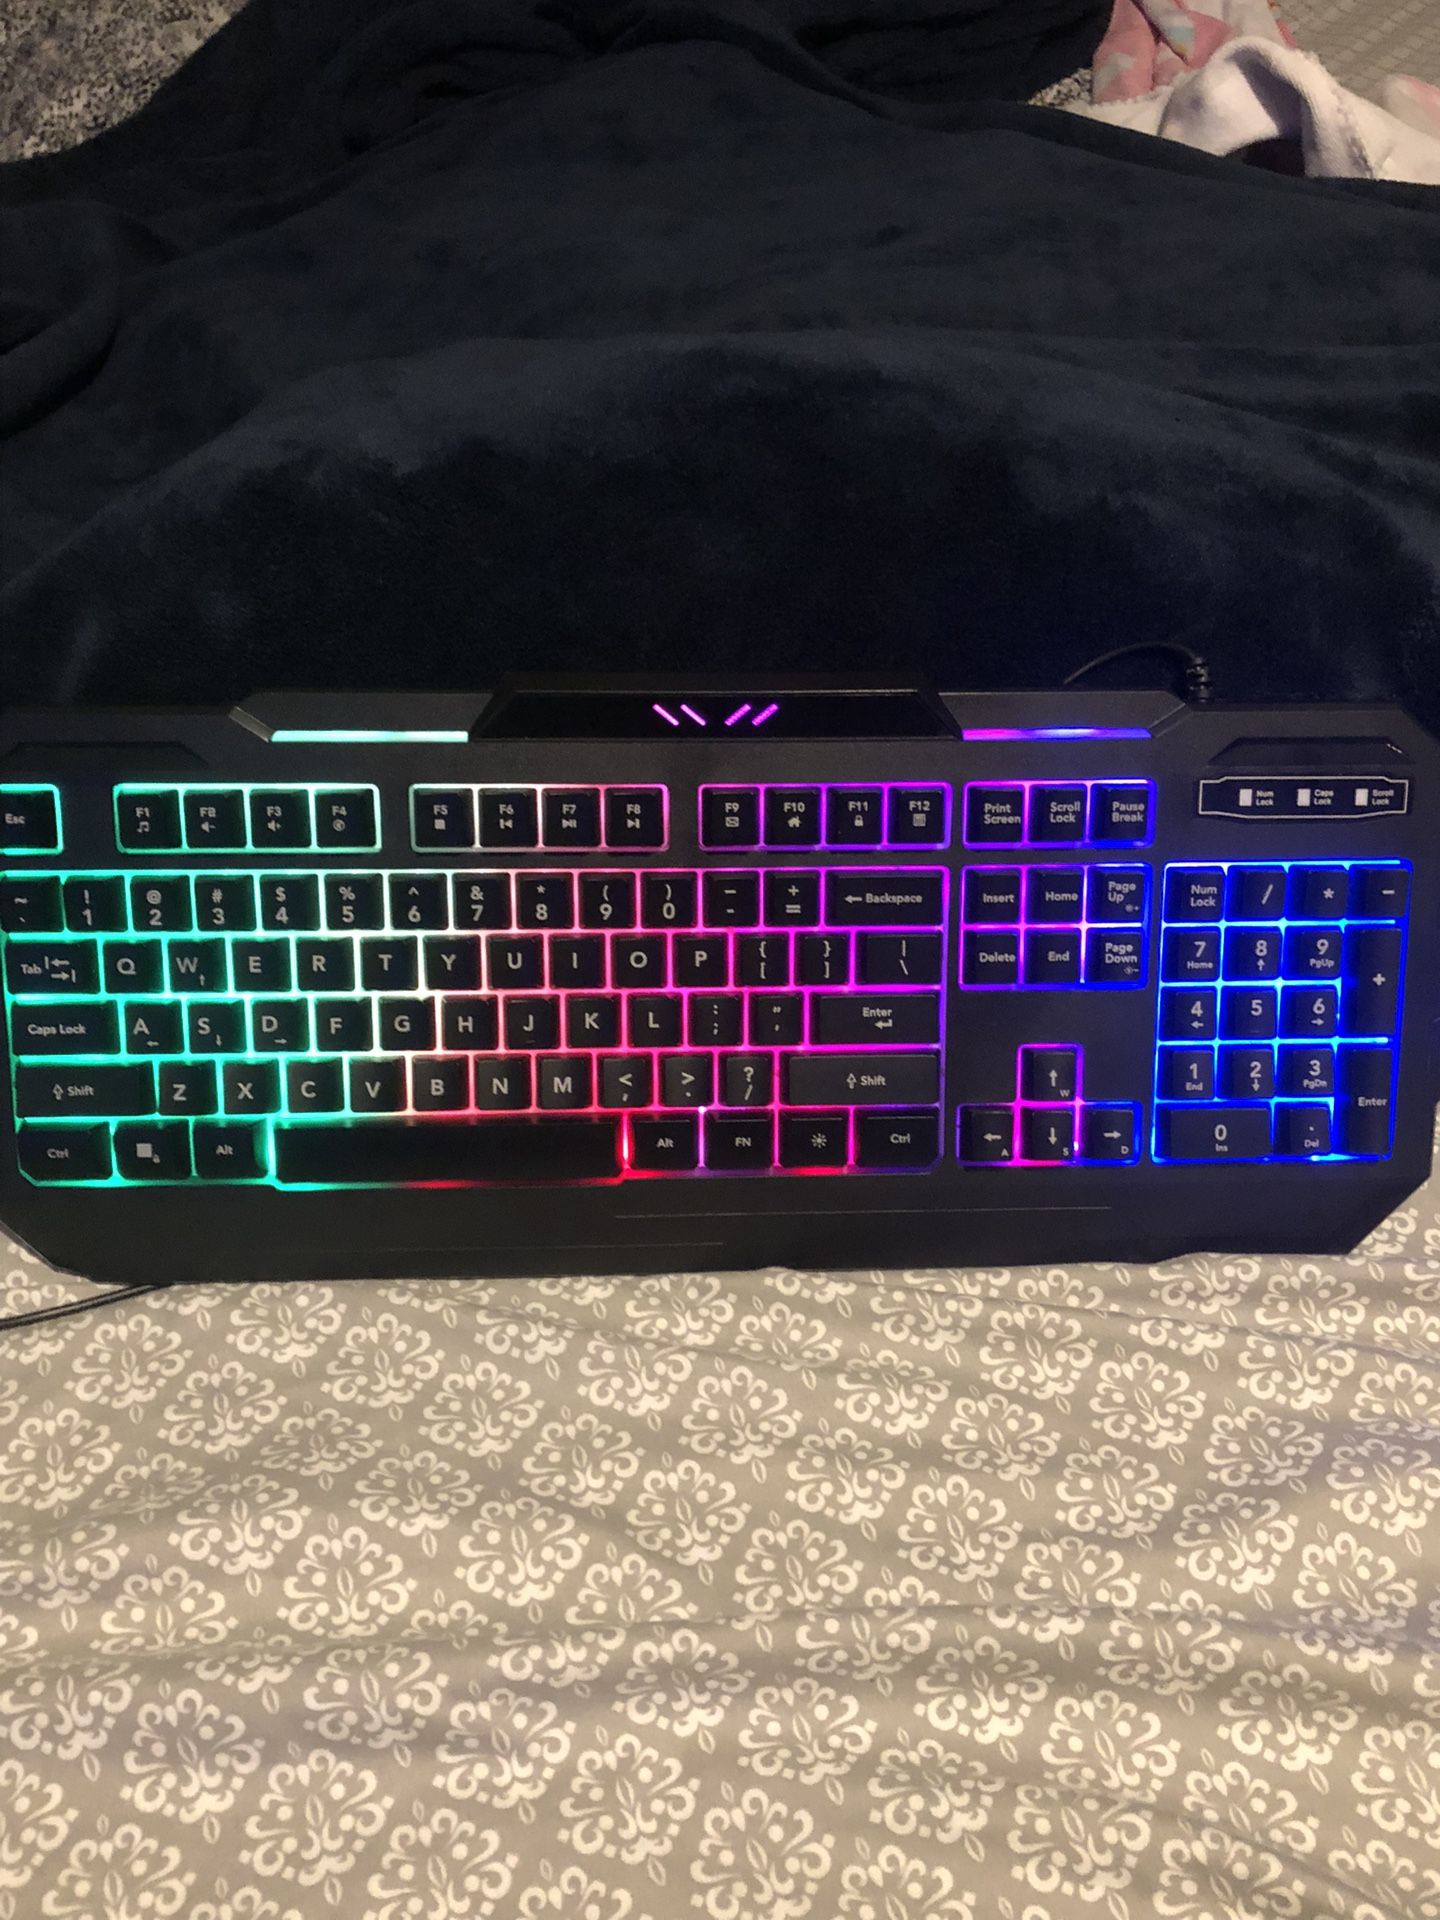 Selling this Keyboard for 25$